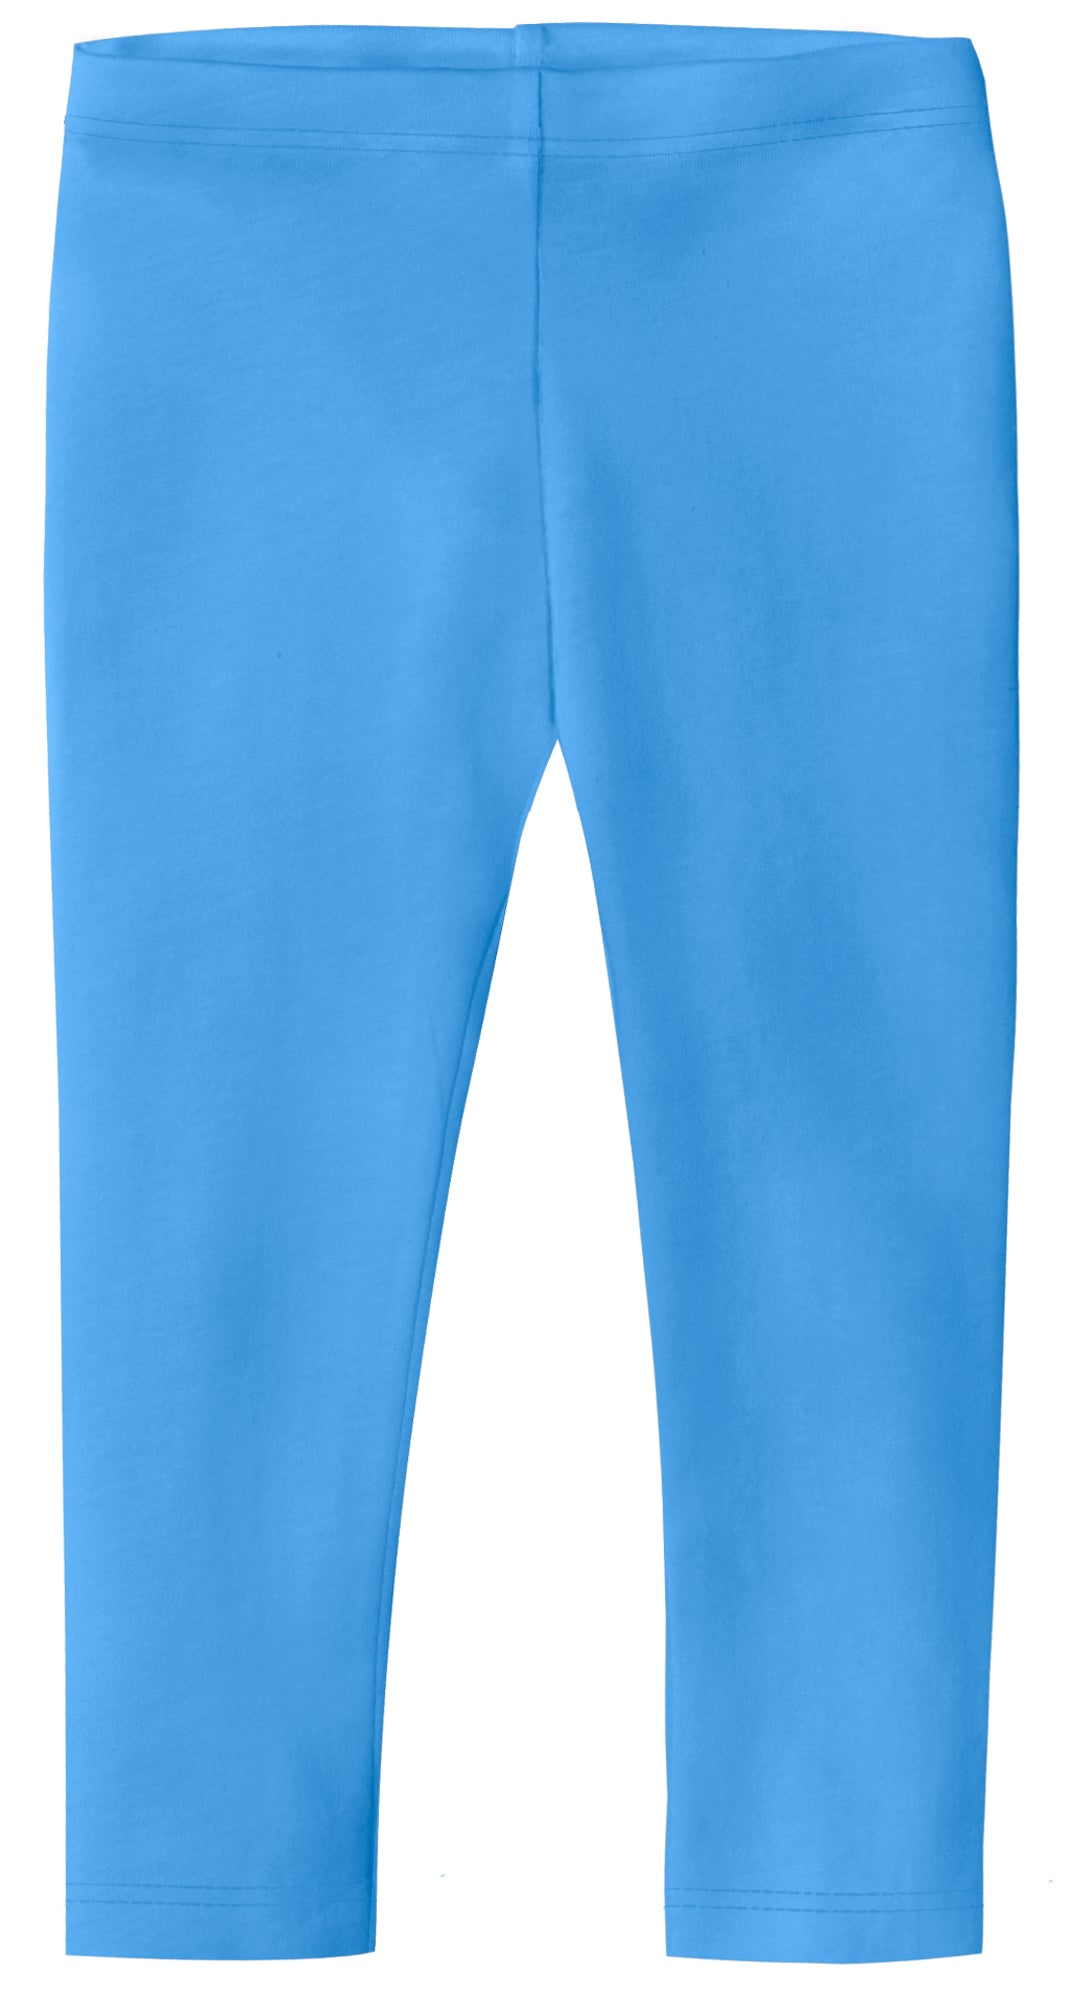  Cozeyat Youth Girls' Capris Leggings Soft Kids Compression Pants  Blue Ocean Pattern Short Yoga Tights for Kids Aged 4-5 Years: Clothing,  Shoes & Jewelry